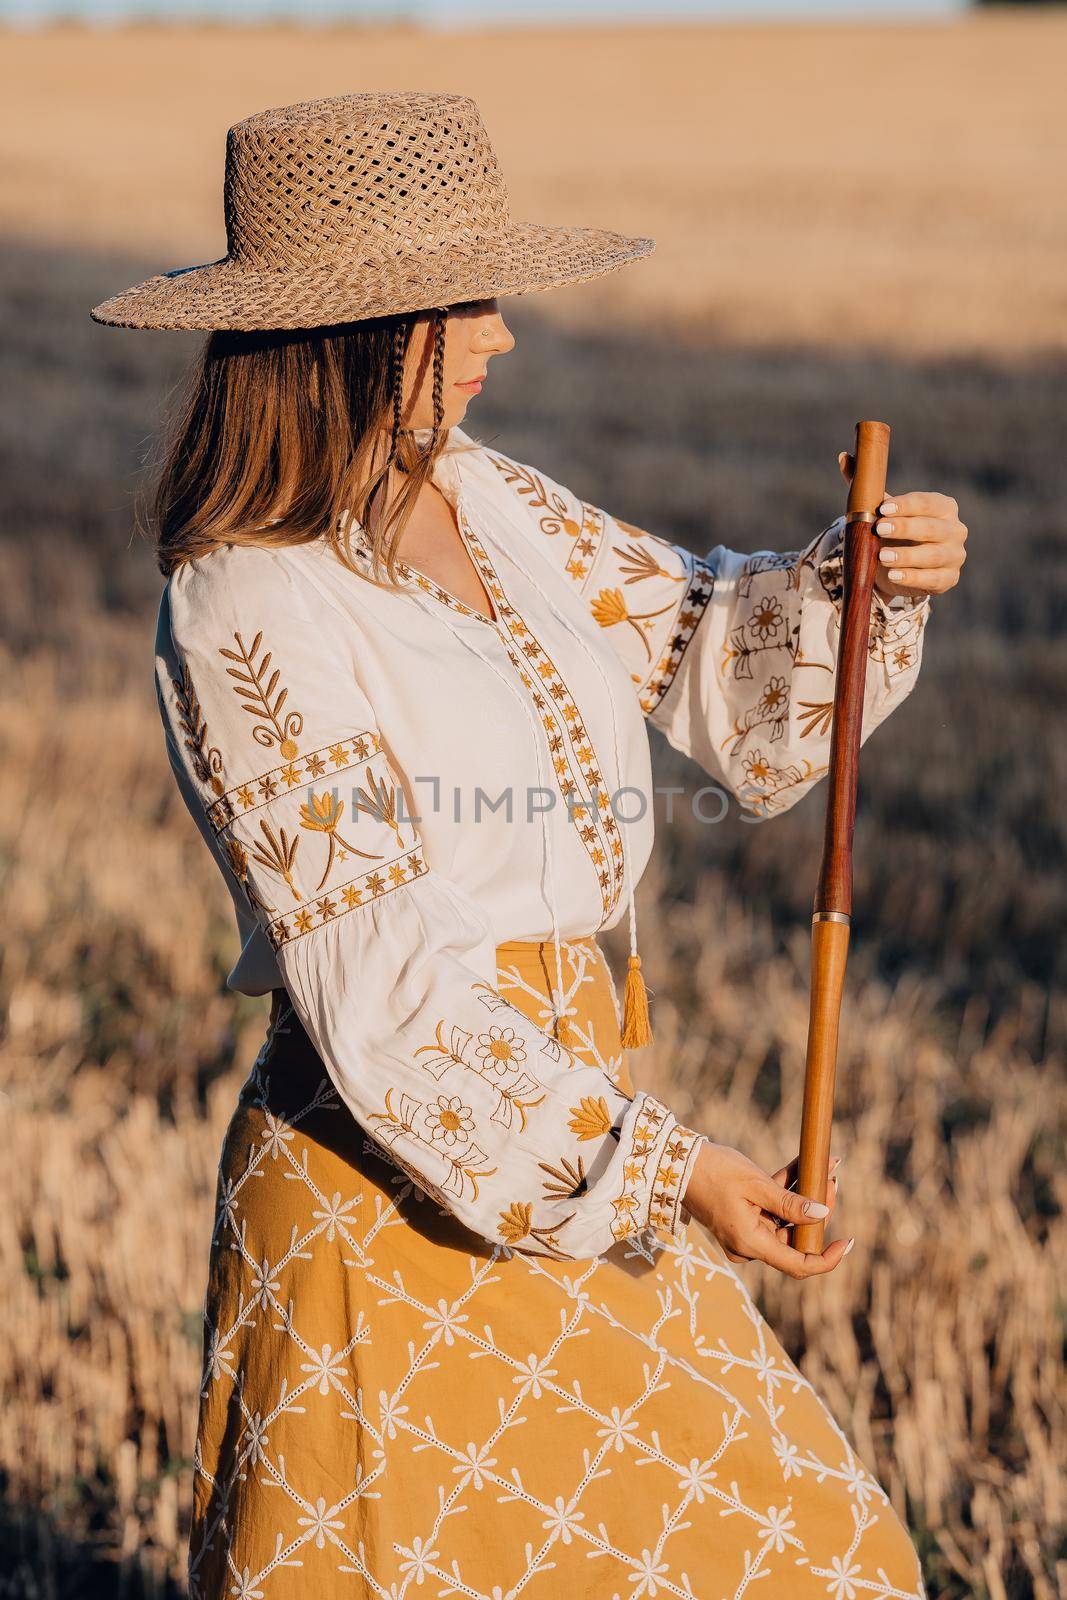 Woman holding woodwind wooden flute - ukrainian telenka or tylynka. Folk music concept. Musical instrument. Musician in traditional embroidered shirt - Vyshyvanka. High quality photo